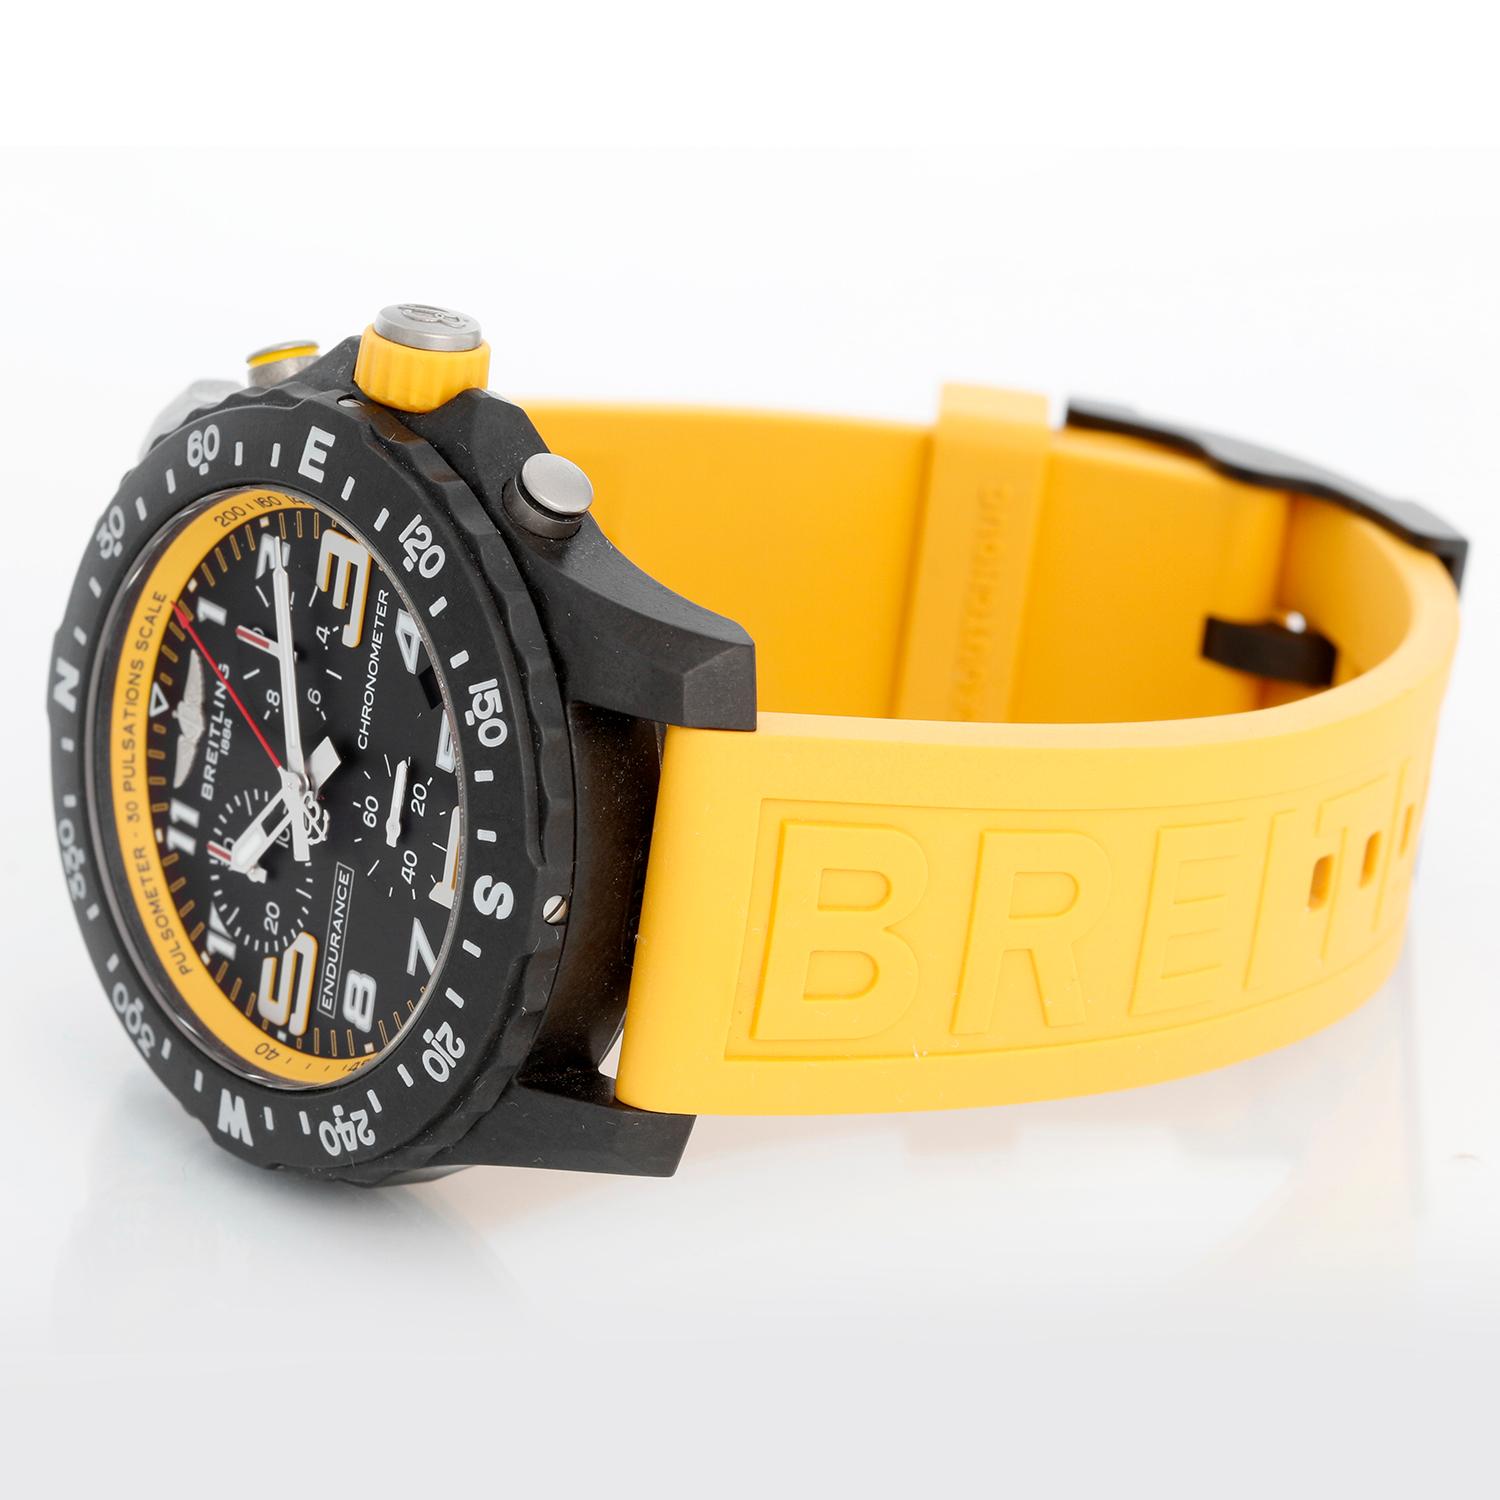 Breitling Endurance Pro Breitlight 44mm Yellow X82310 - Quartz,Sapphire crystal. Black Composite Case  (44mm)  with A Yellow Rubber Strap, Black Composite Bezel. Black Dial with Luminous Silver-Tone Hands, and Arabic Numeral Hour Markers.. Yellow